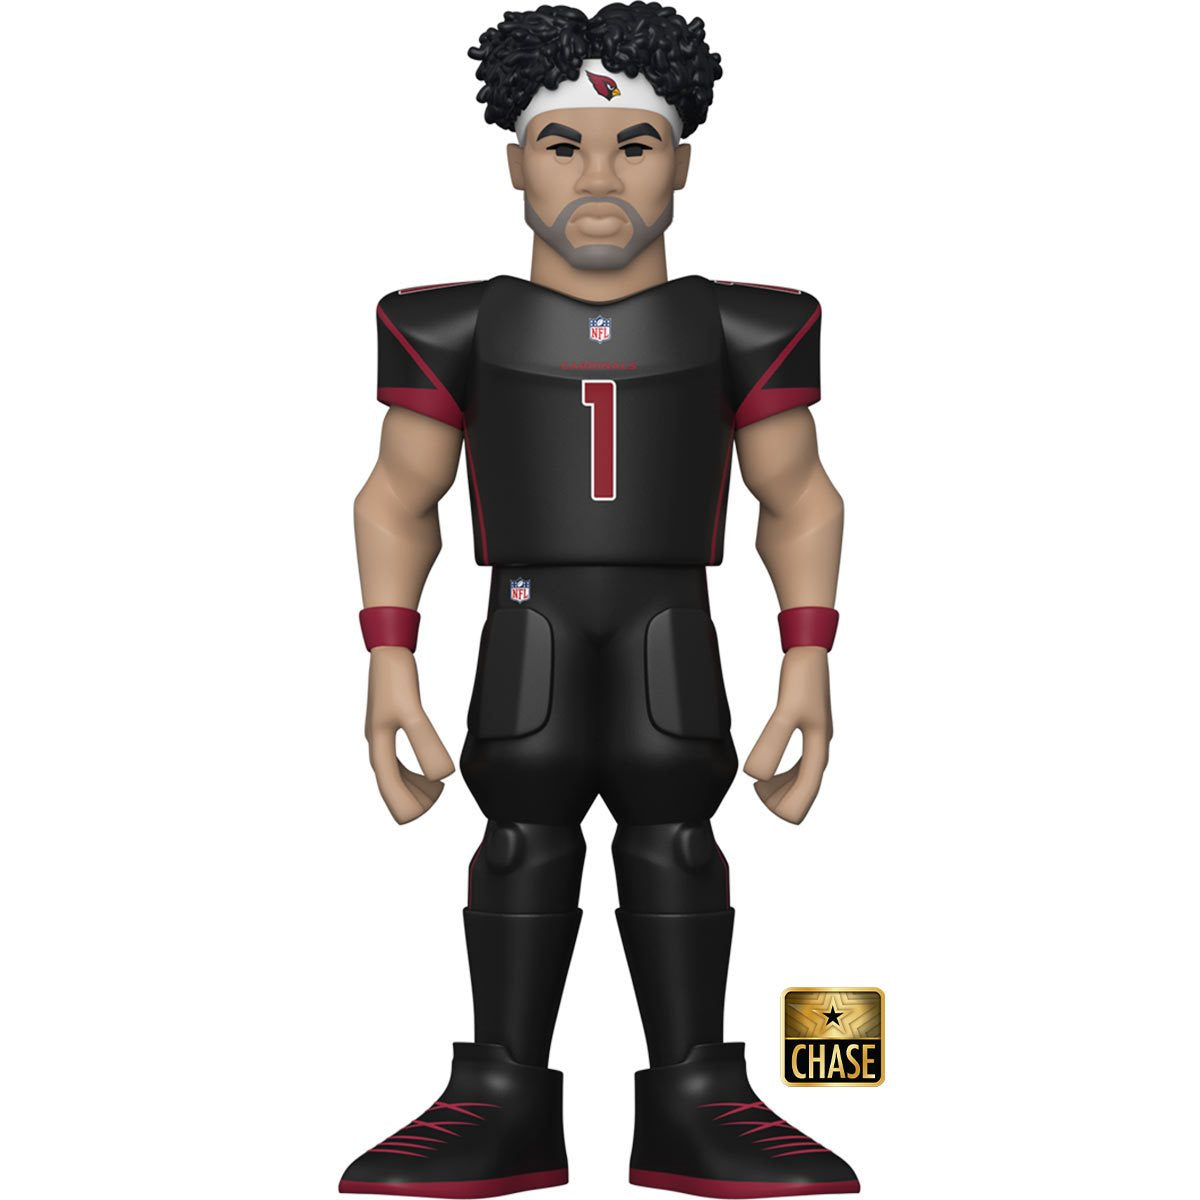 Kyler Murray Cardinals NFL 5-Inch Funko Vinyl Gold Figure w/ Chance of chase!